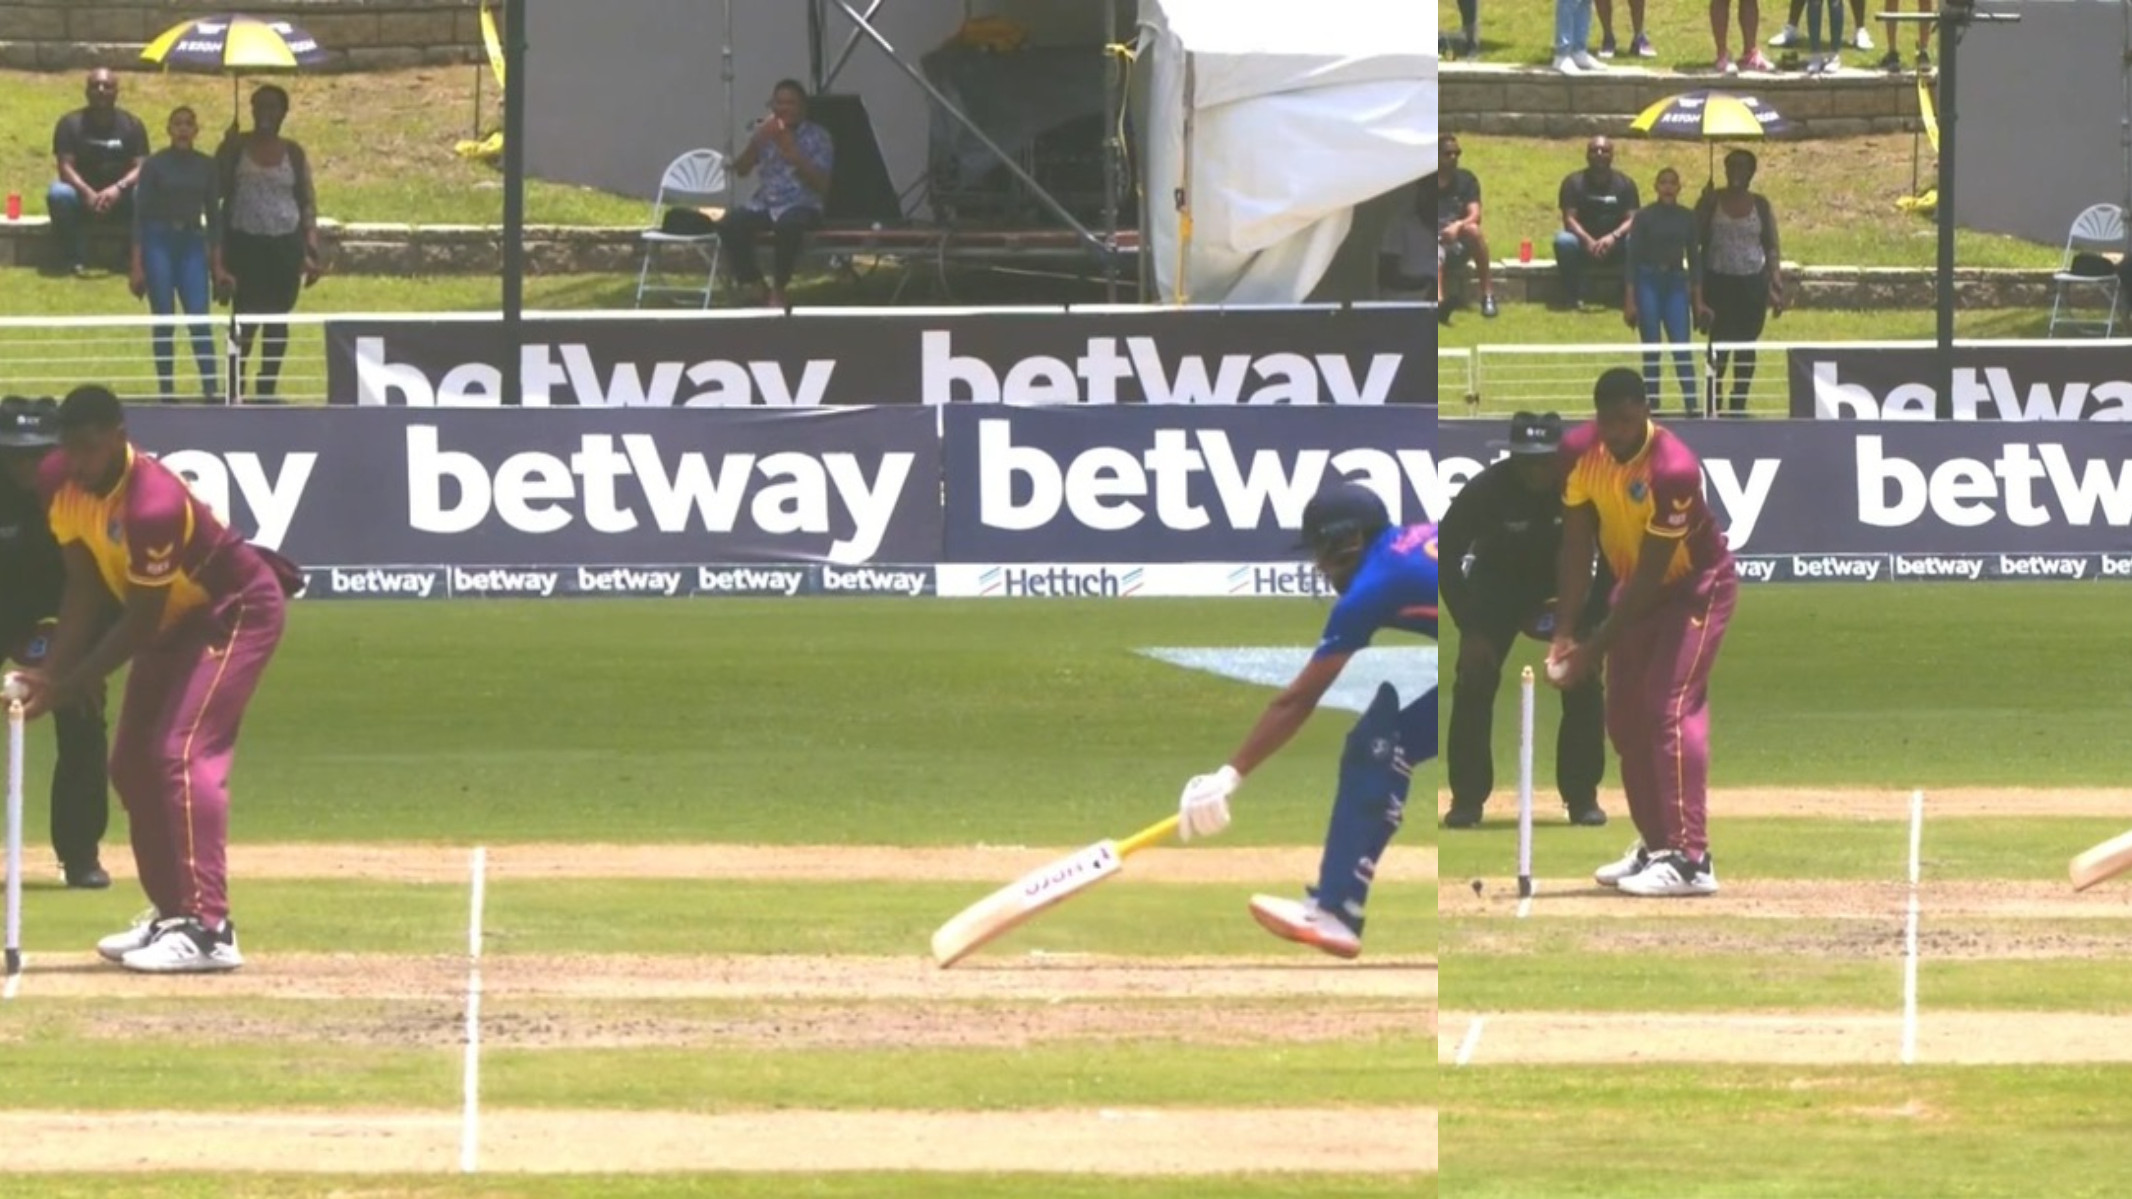 WI v IND 2022: WATCH- Obed McCoy bizarrely doesn’t run out R Ashwin despite him being far away from crease